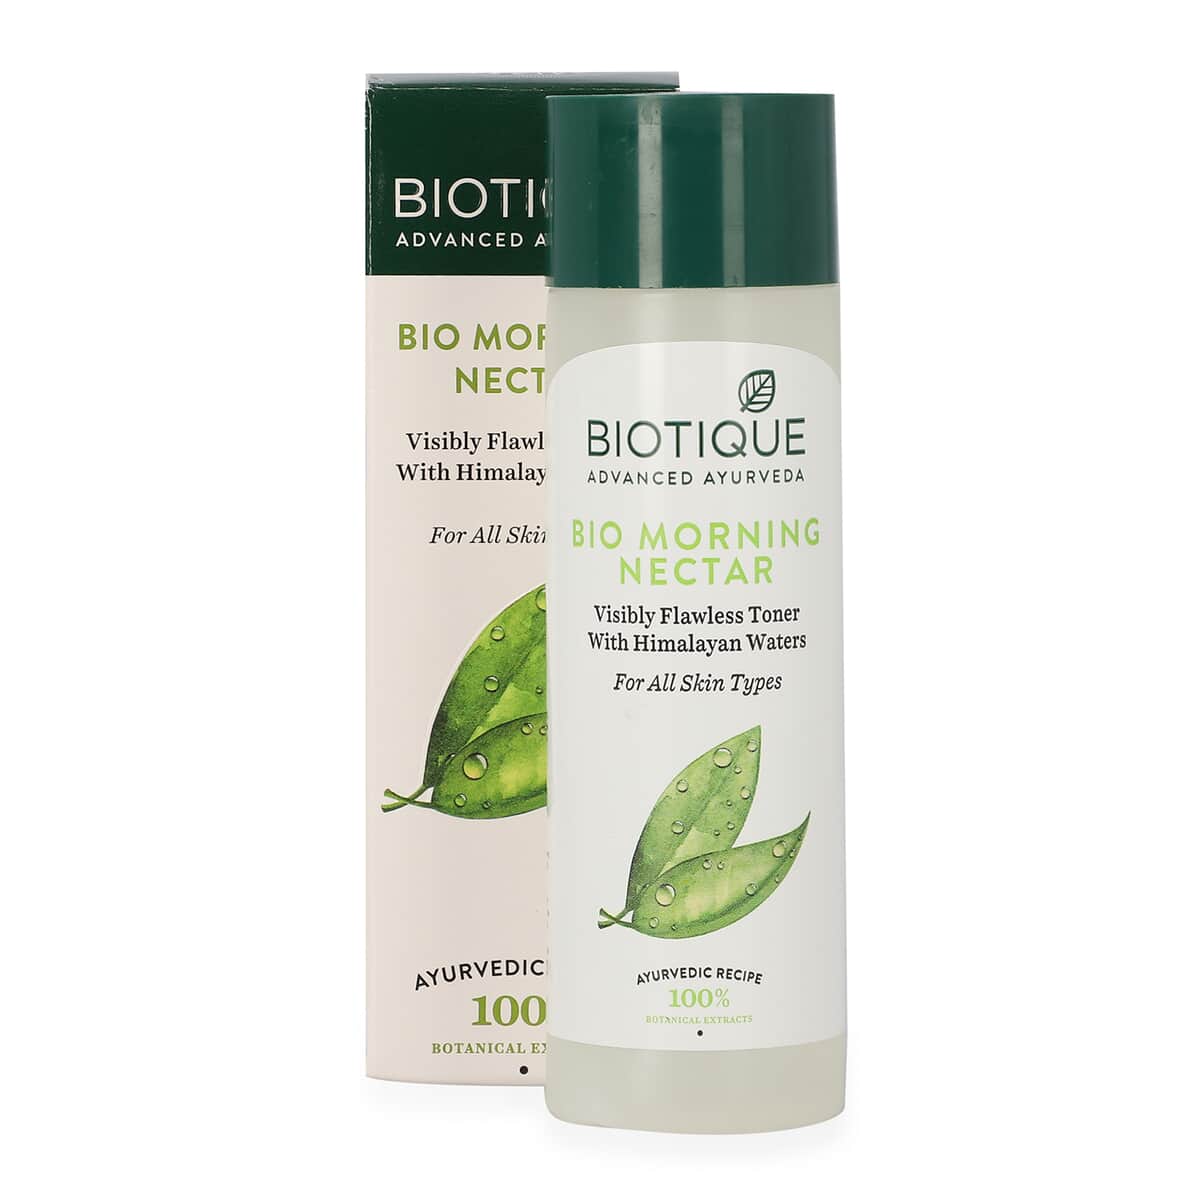 BIOTIQUE Advanced Ayurveda Visibly Flawless Toner with Himalayan Waters For All Skin Types image number 0